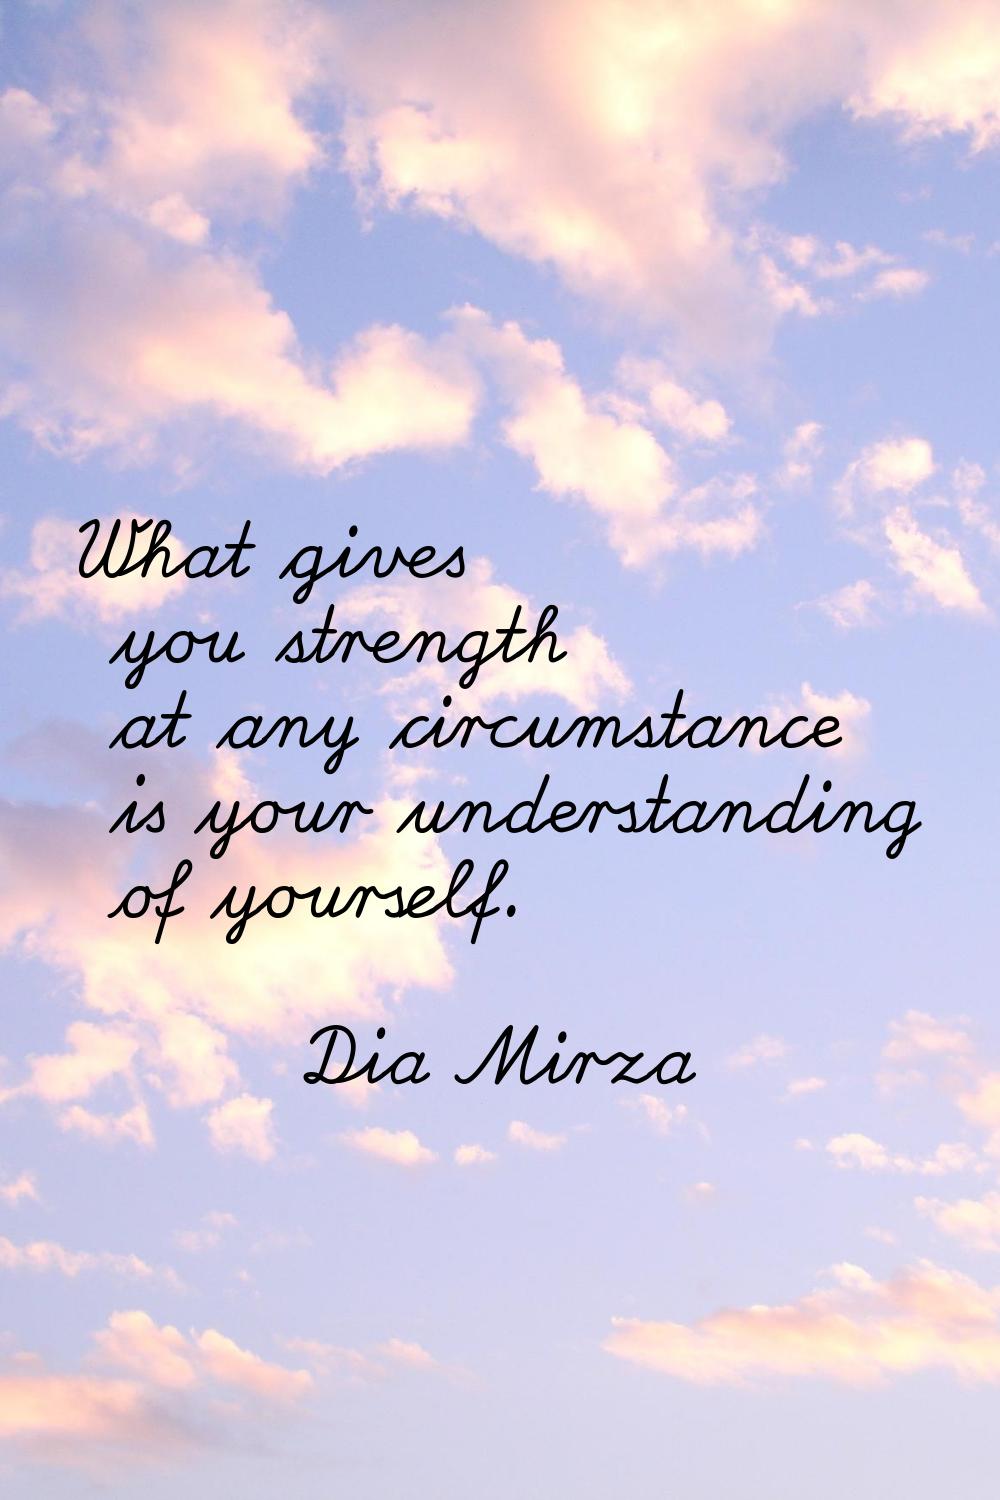 What gives you strength at any circumstance is your understanding of yourself.